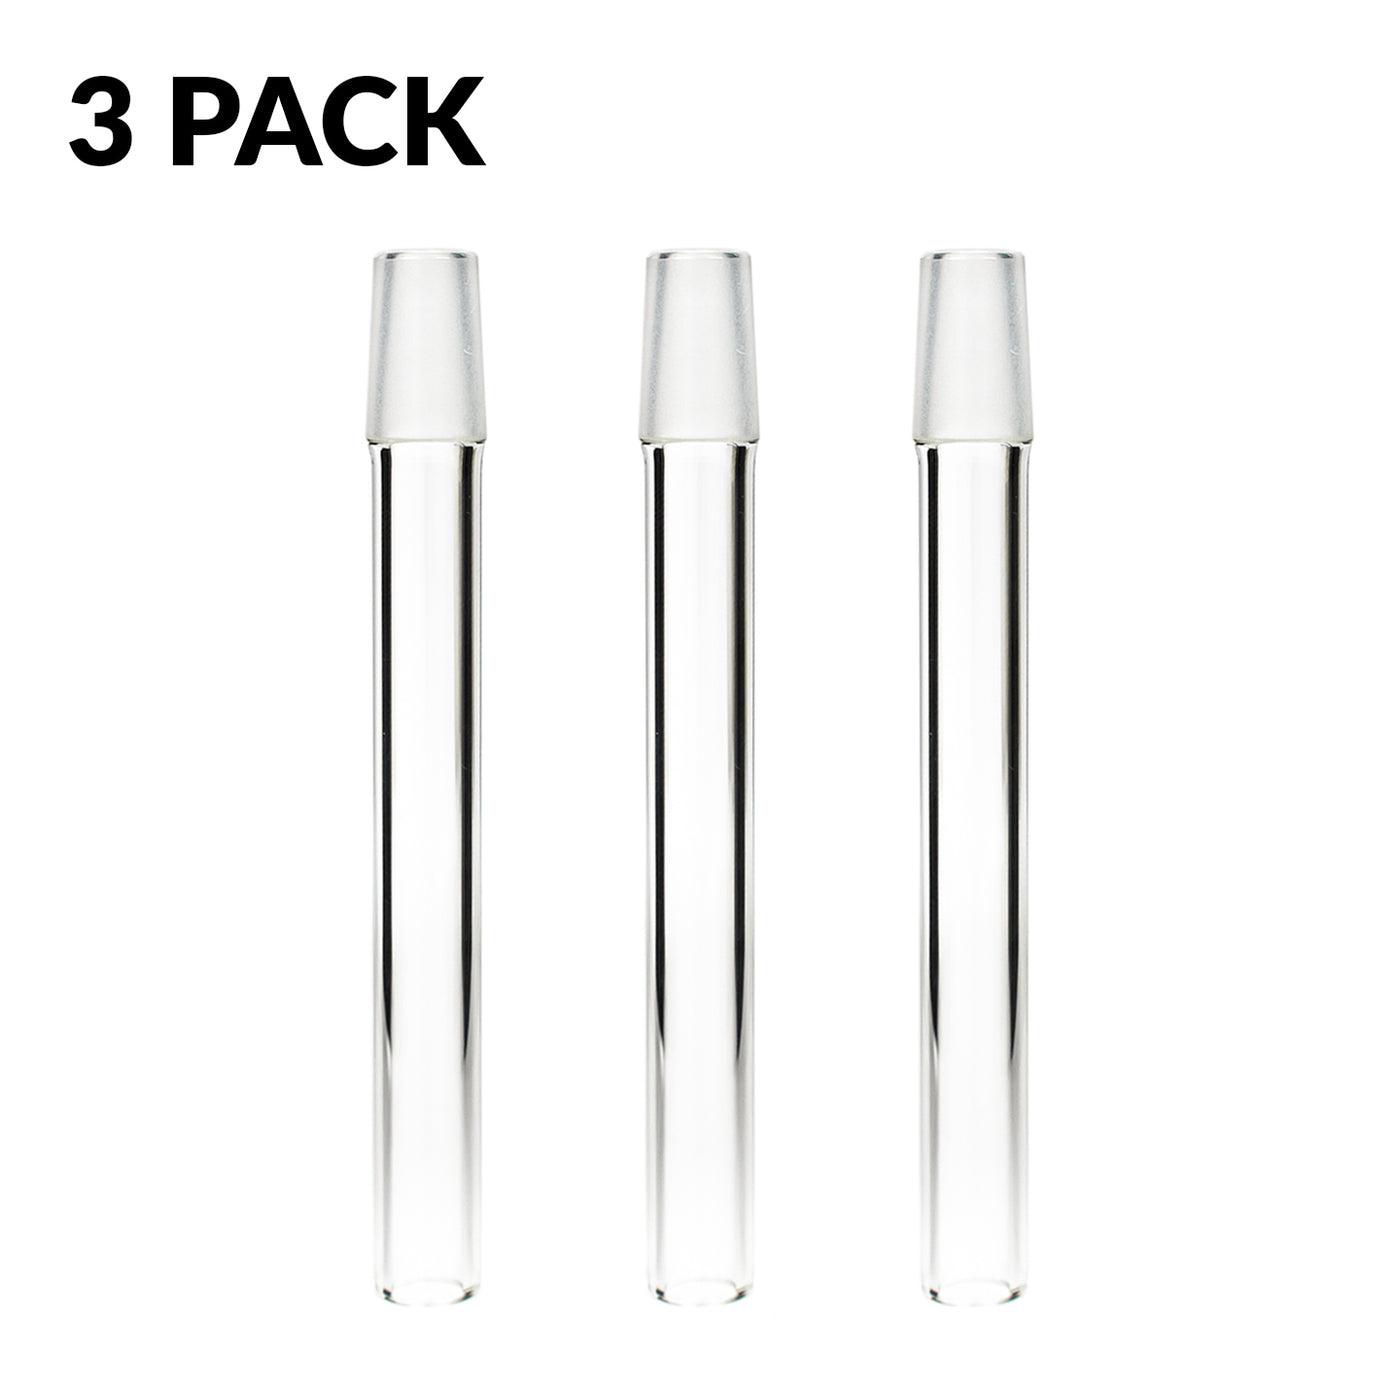 Male Ground Joint 3-Pack